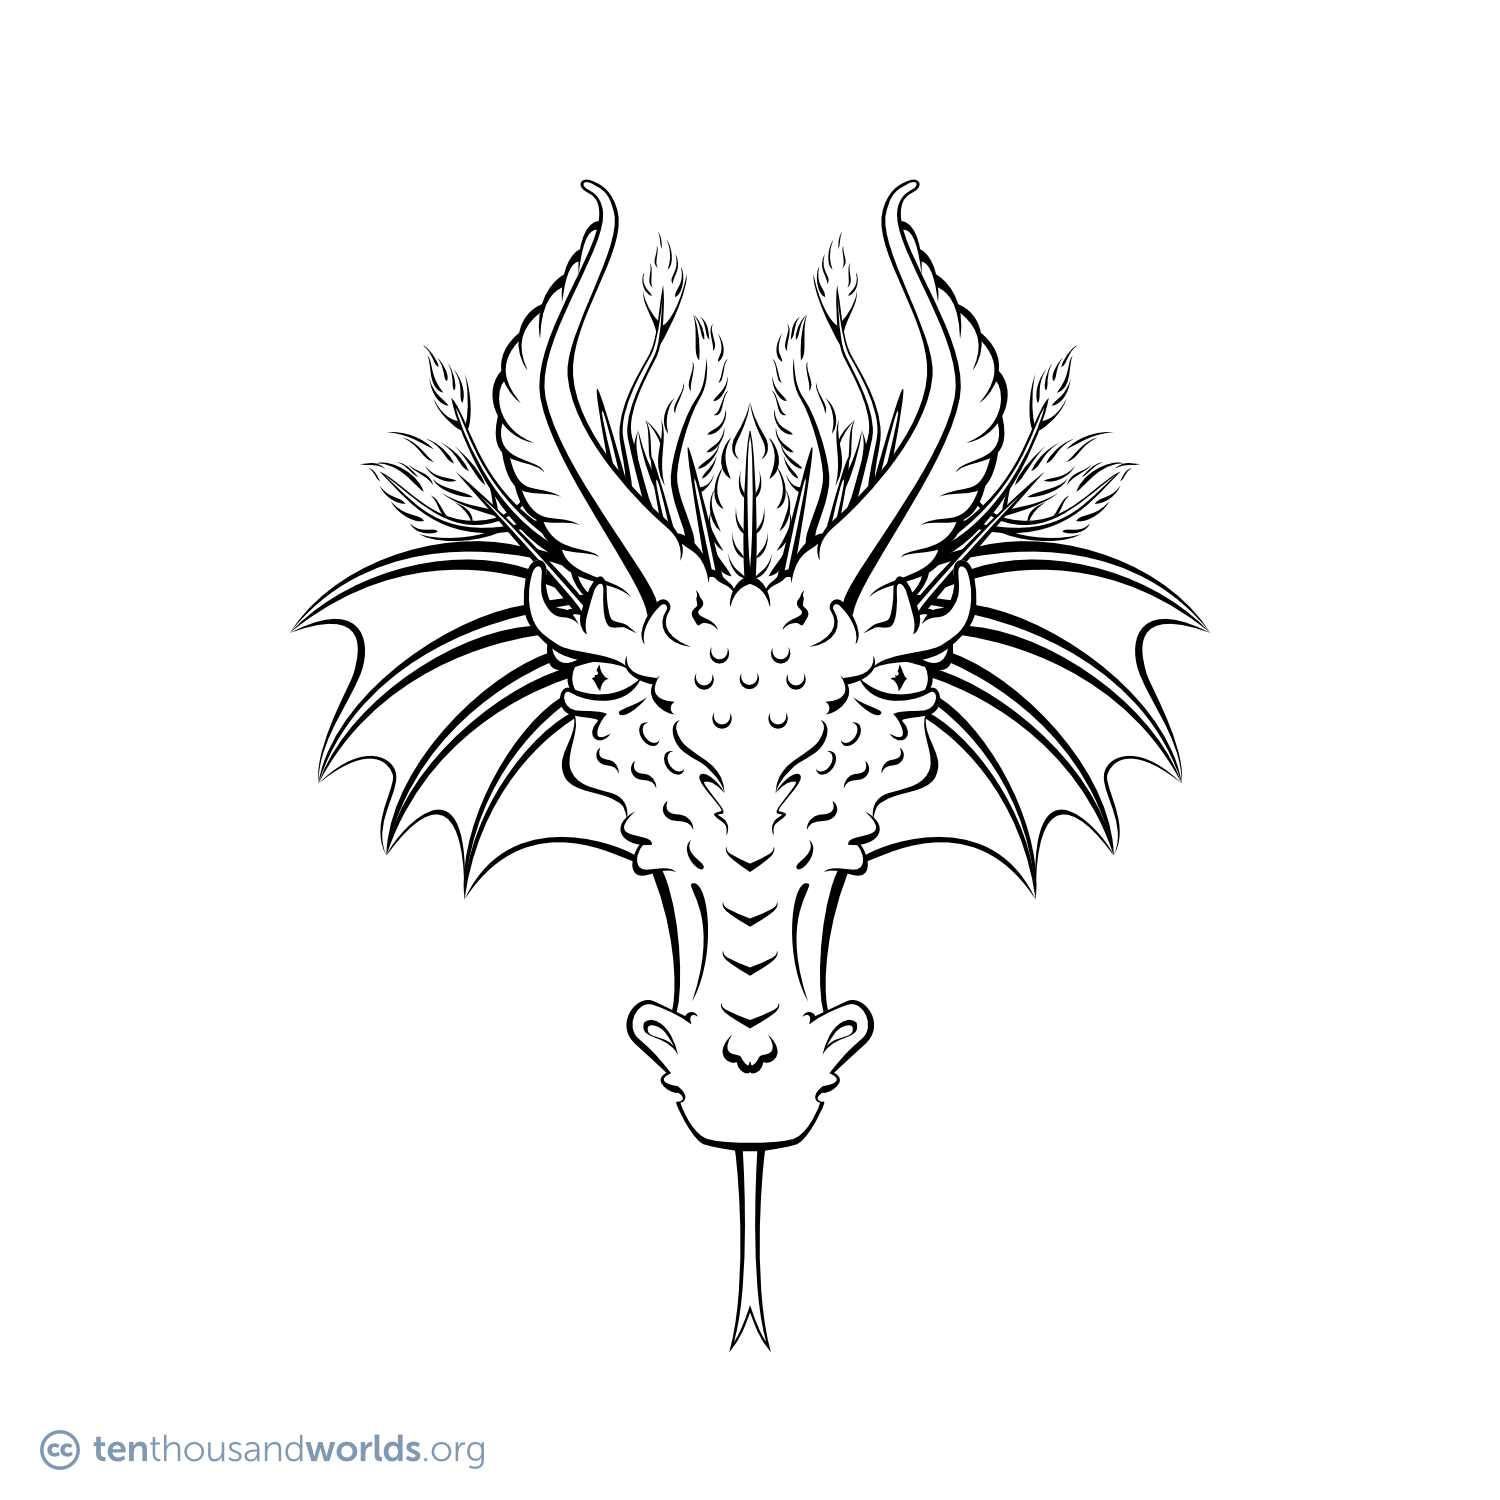 An ink outline of an elongated reptilian face with frills, feathers, spikes, a pair of curved-back horns, and a forked tongue.